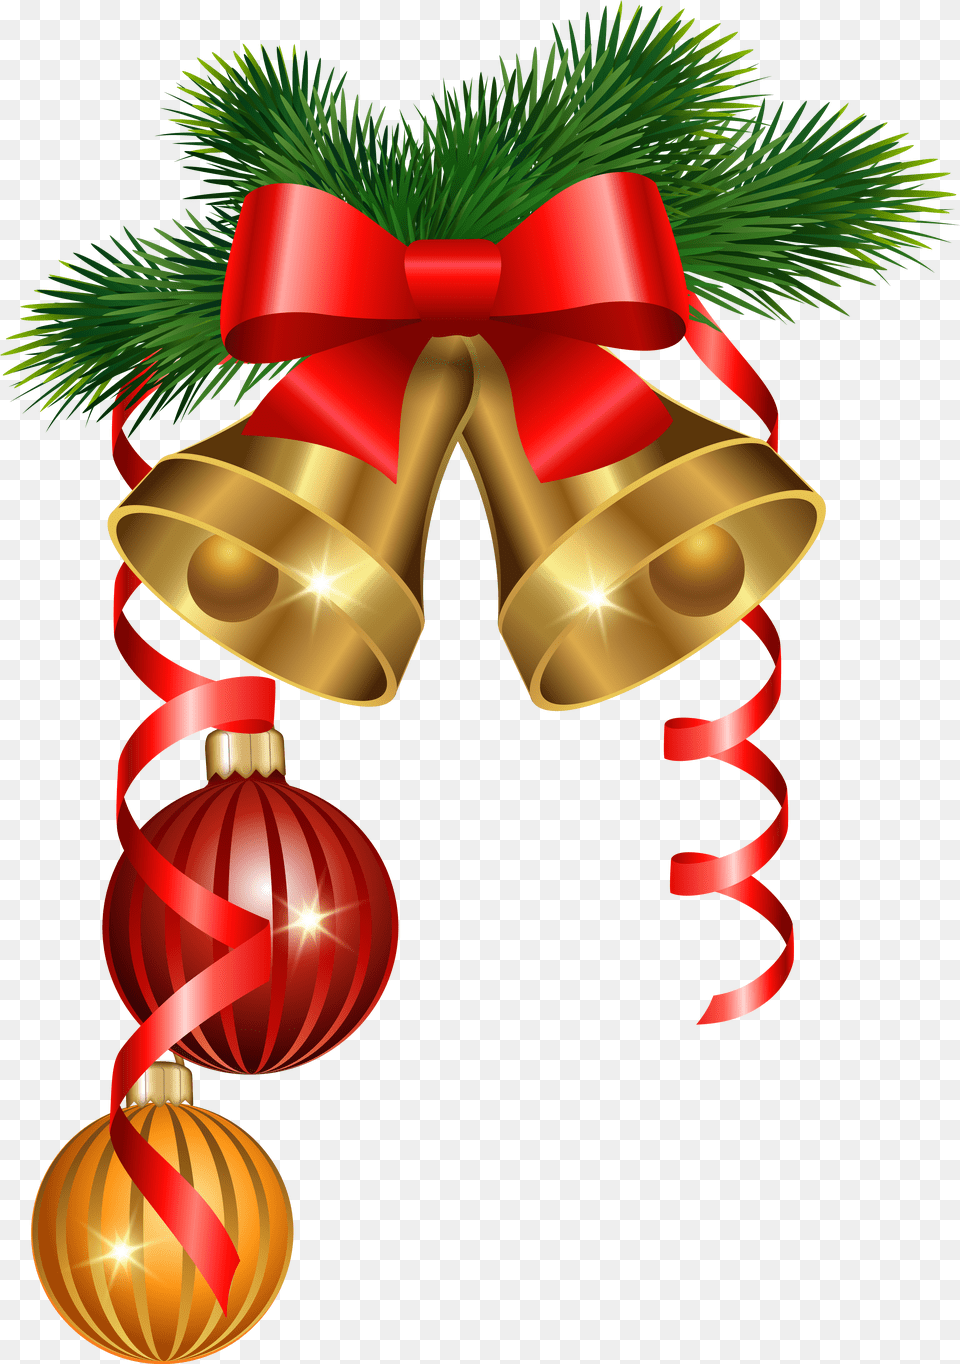 And Golden Tree Decoration Ornaments Christmas Bells Merry Christmas Bells Free Transparent Png